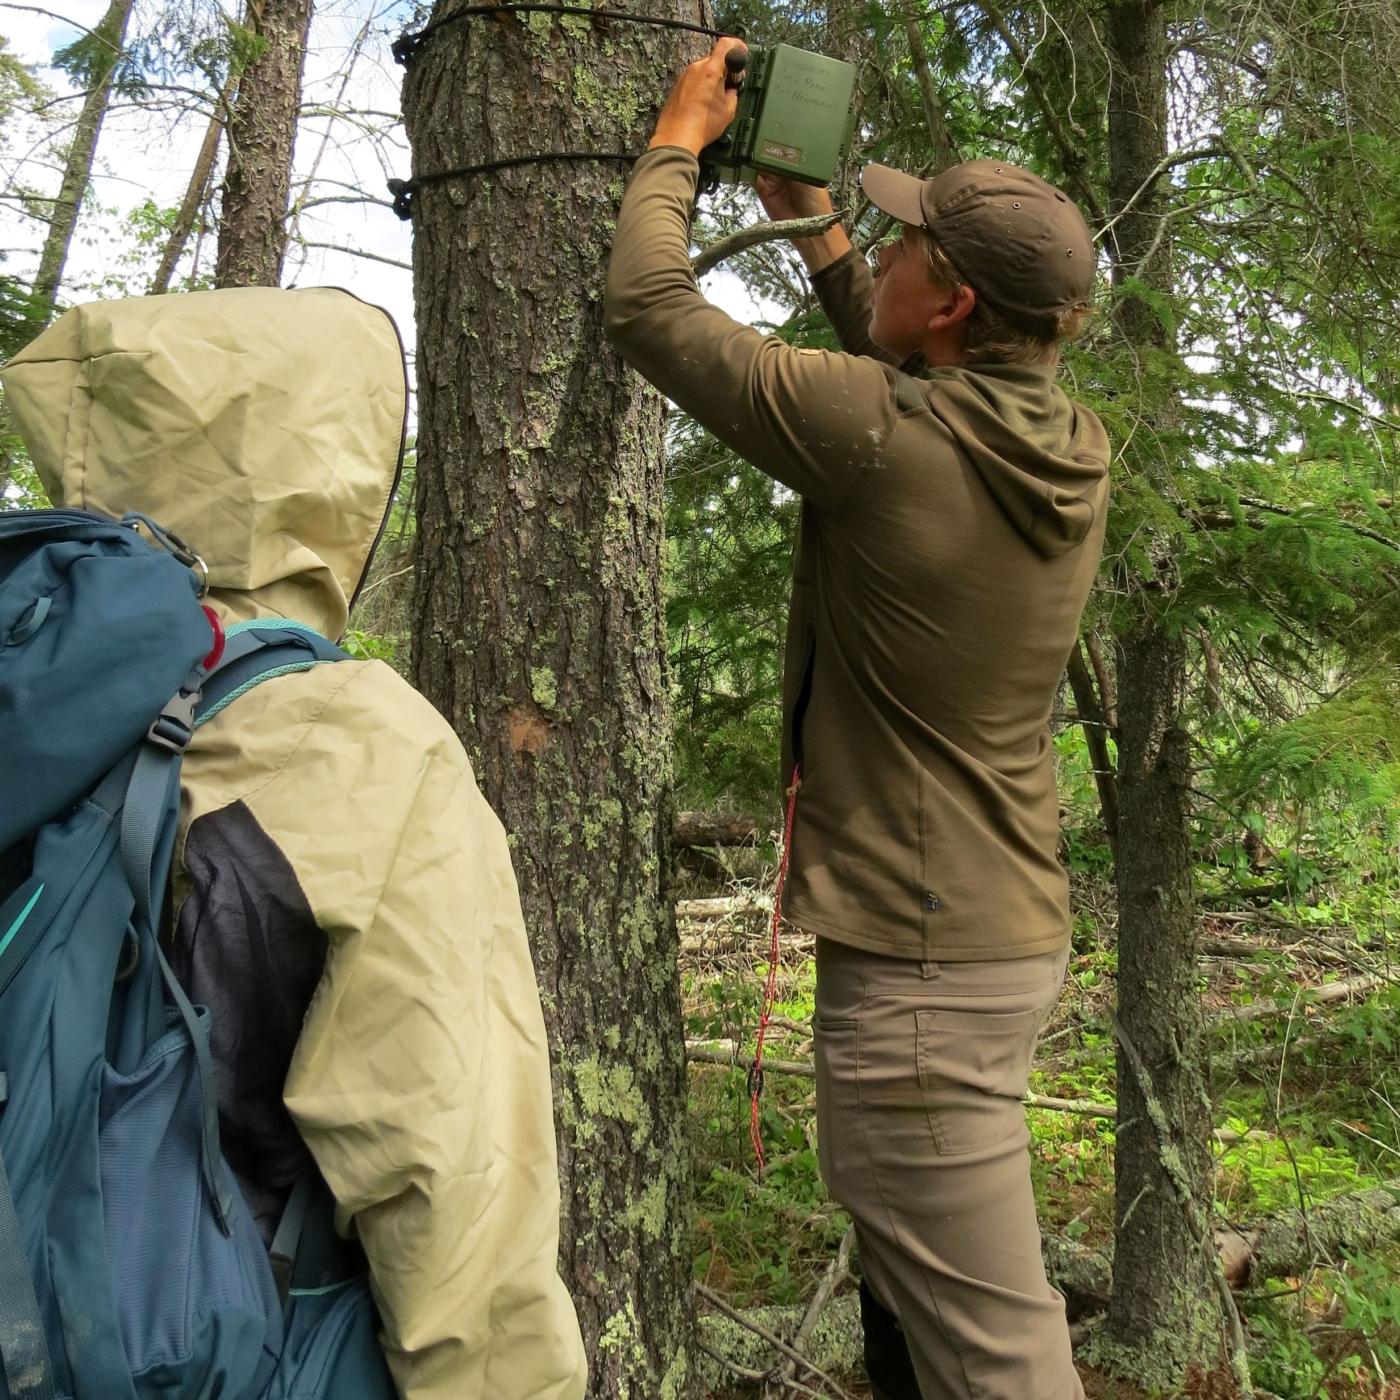 Two field technicians set up a recorder on a tree in the forests.